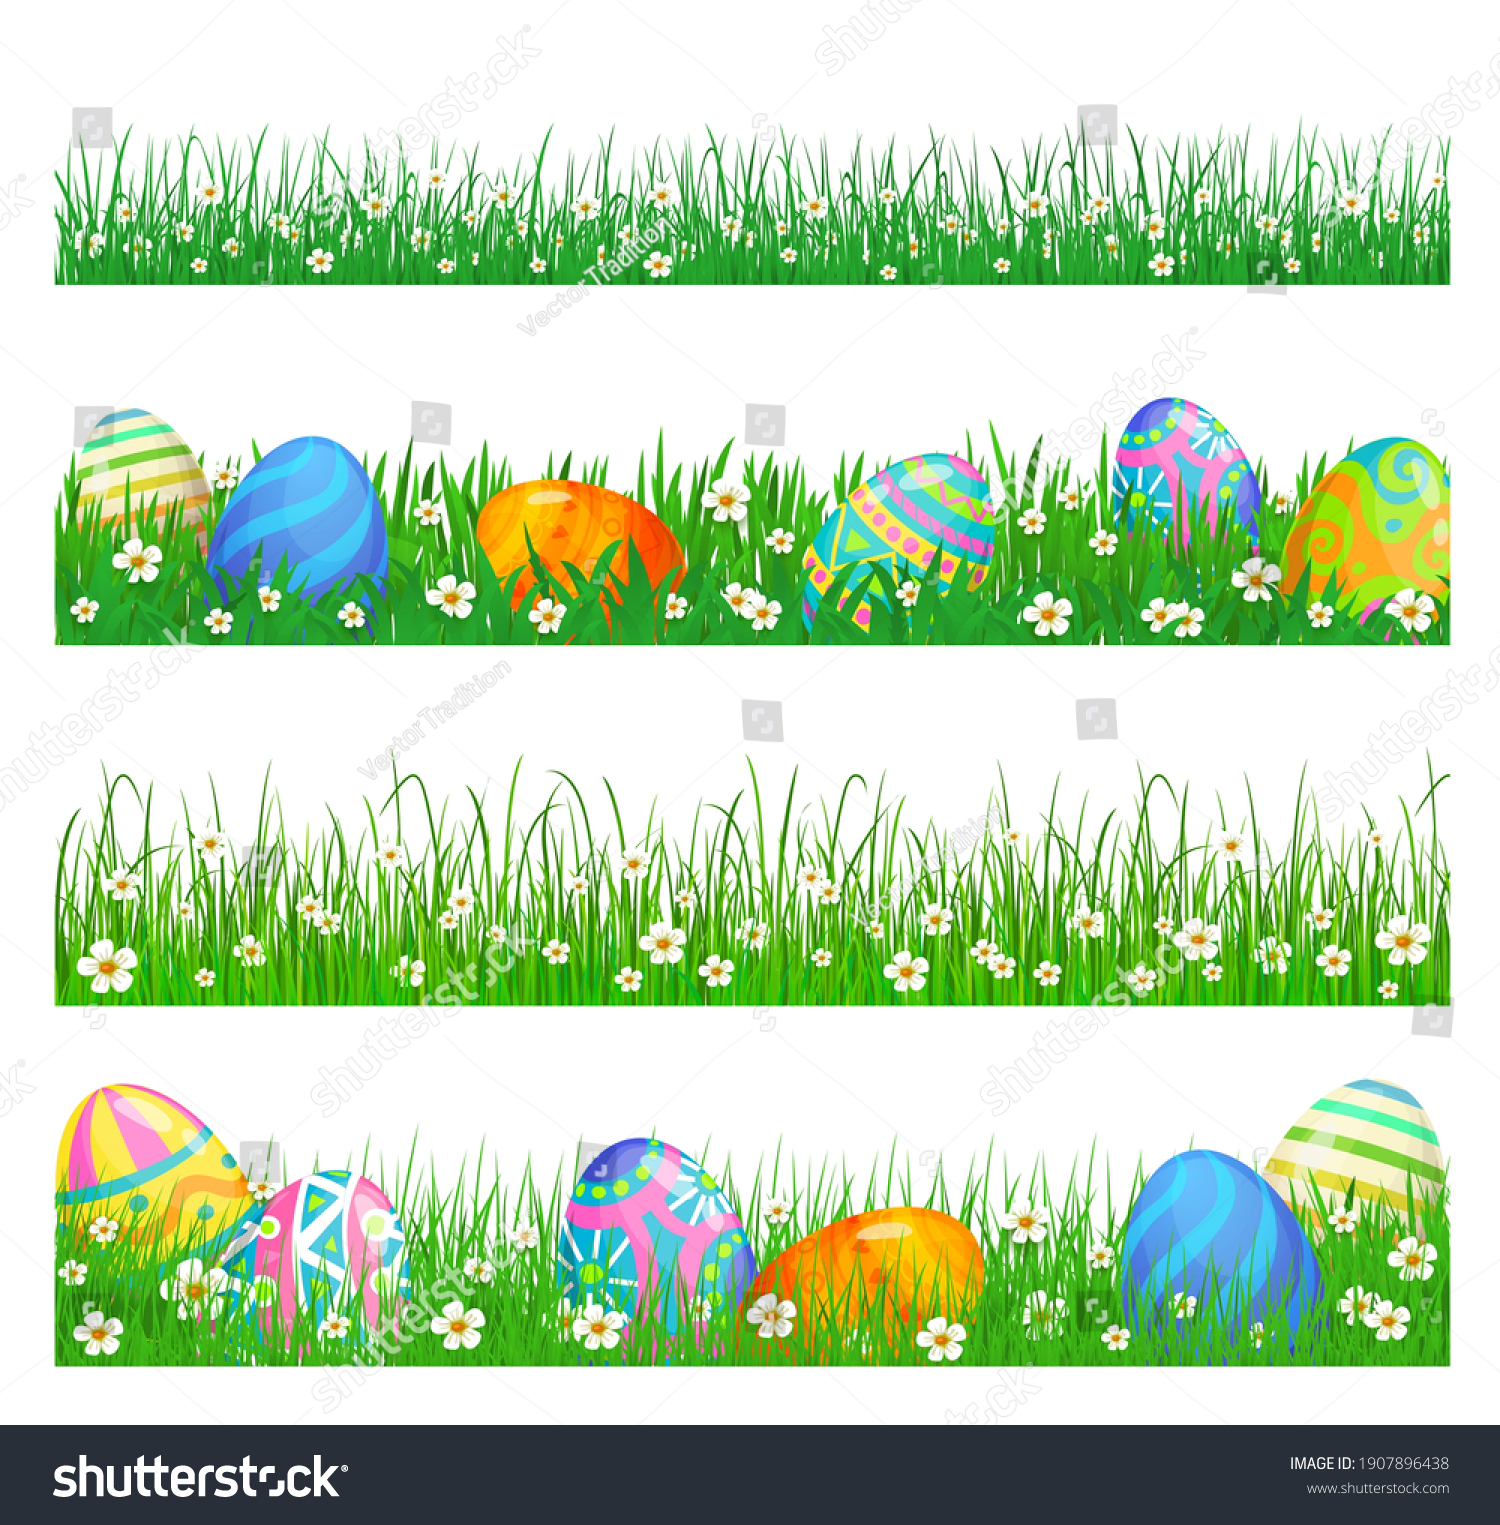 Easter eggs and green grass vector borders of Easter egg hunt religion holiday design. Spring grass blades, white flowers and blooming herbs banner, Resurrection Sunday decoration #1907896438